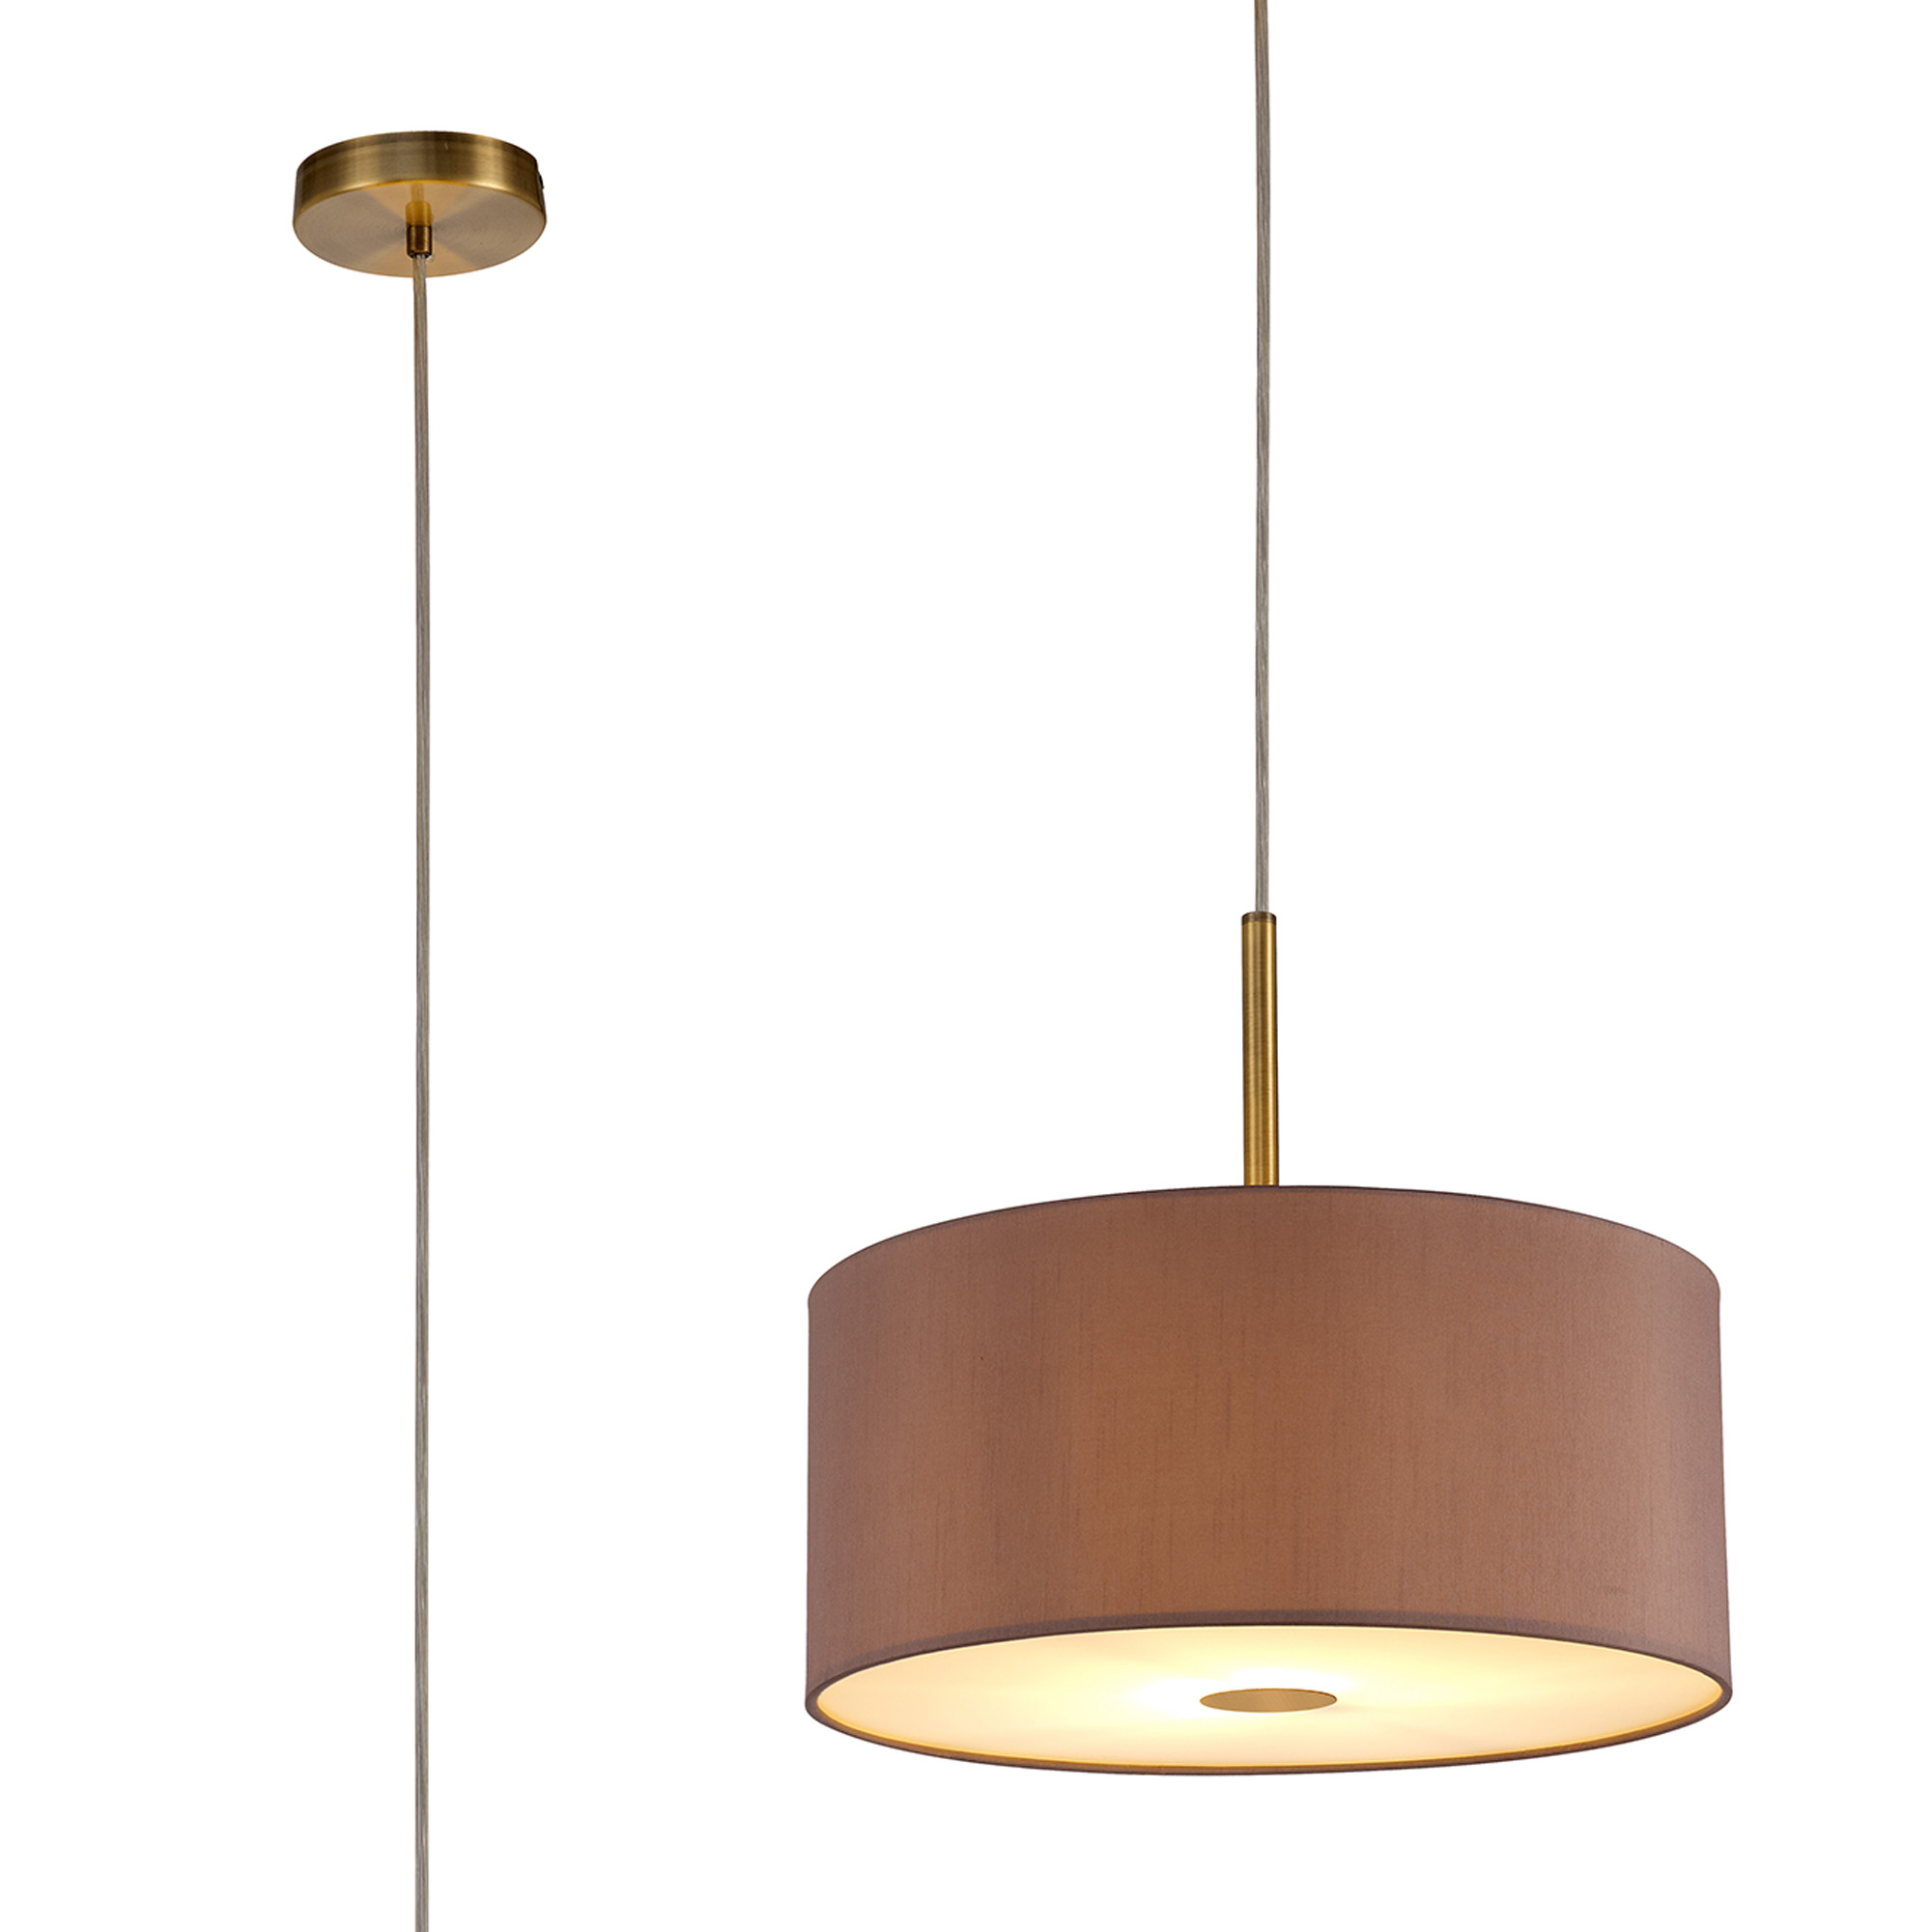 DK0217  Baymont 40cm Pendant 1 Light Antique Brass; Taupe/Halo Gold; Frosted Diffuser